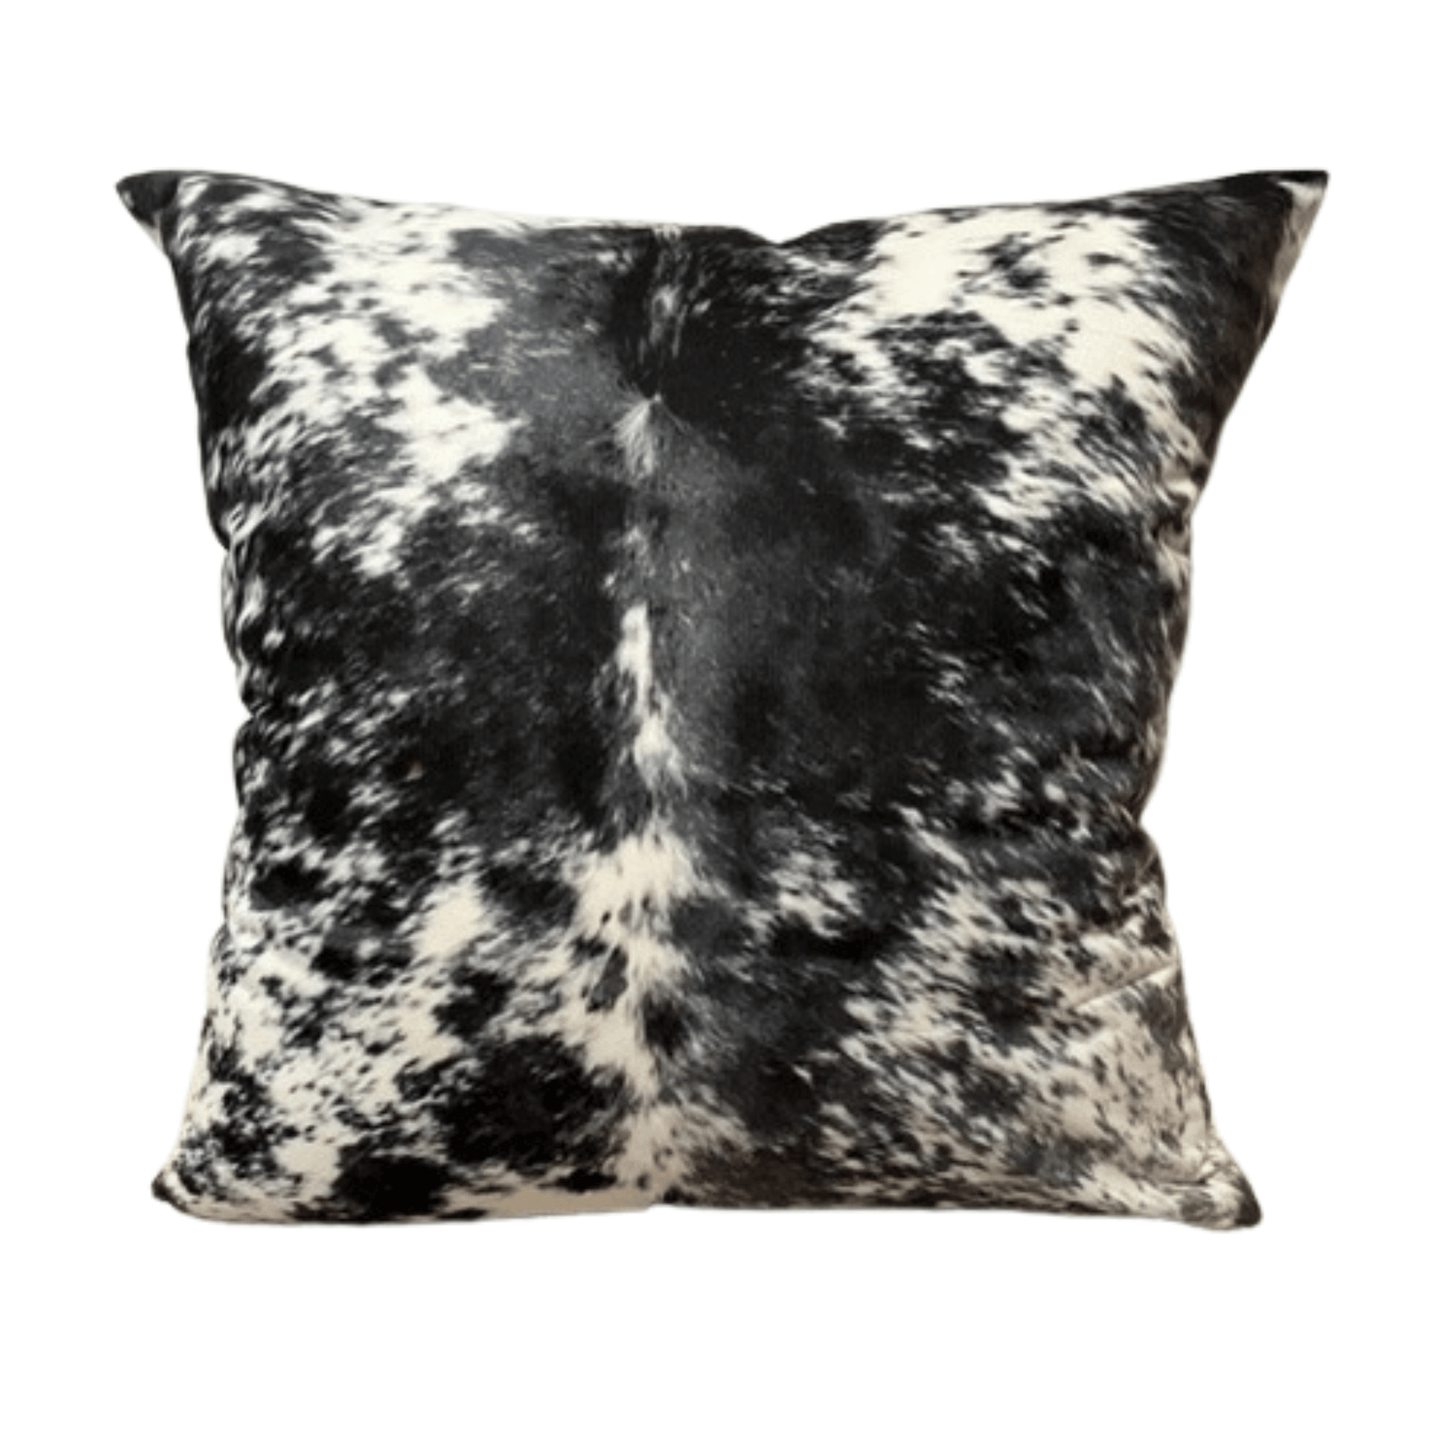 Wholesale Throw Pillow Cover, Faux Black & Grey Cowhide